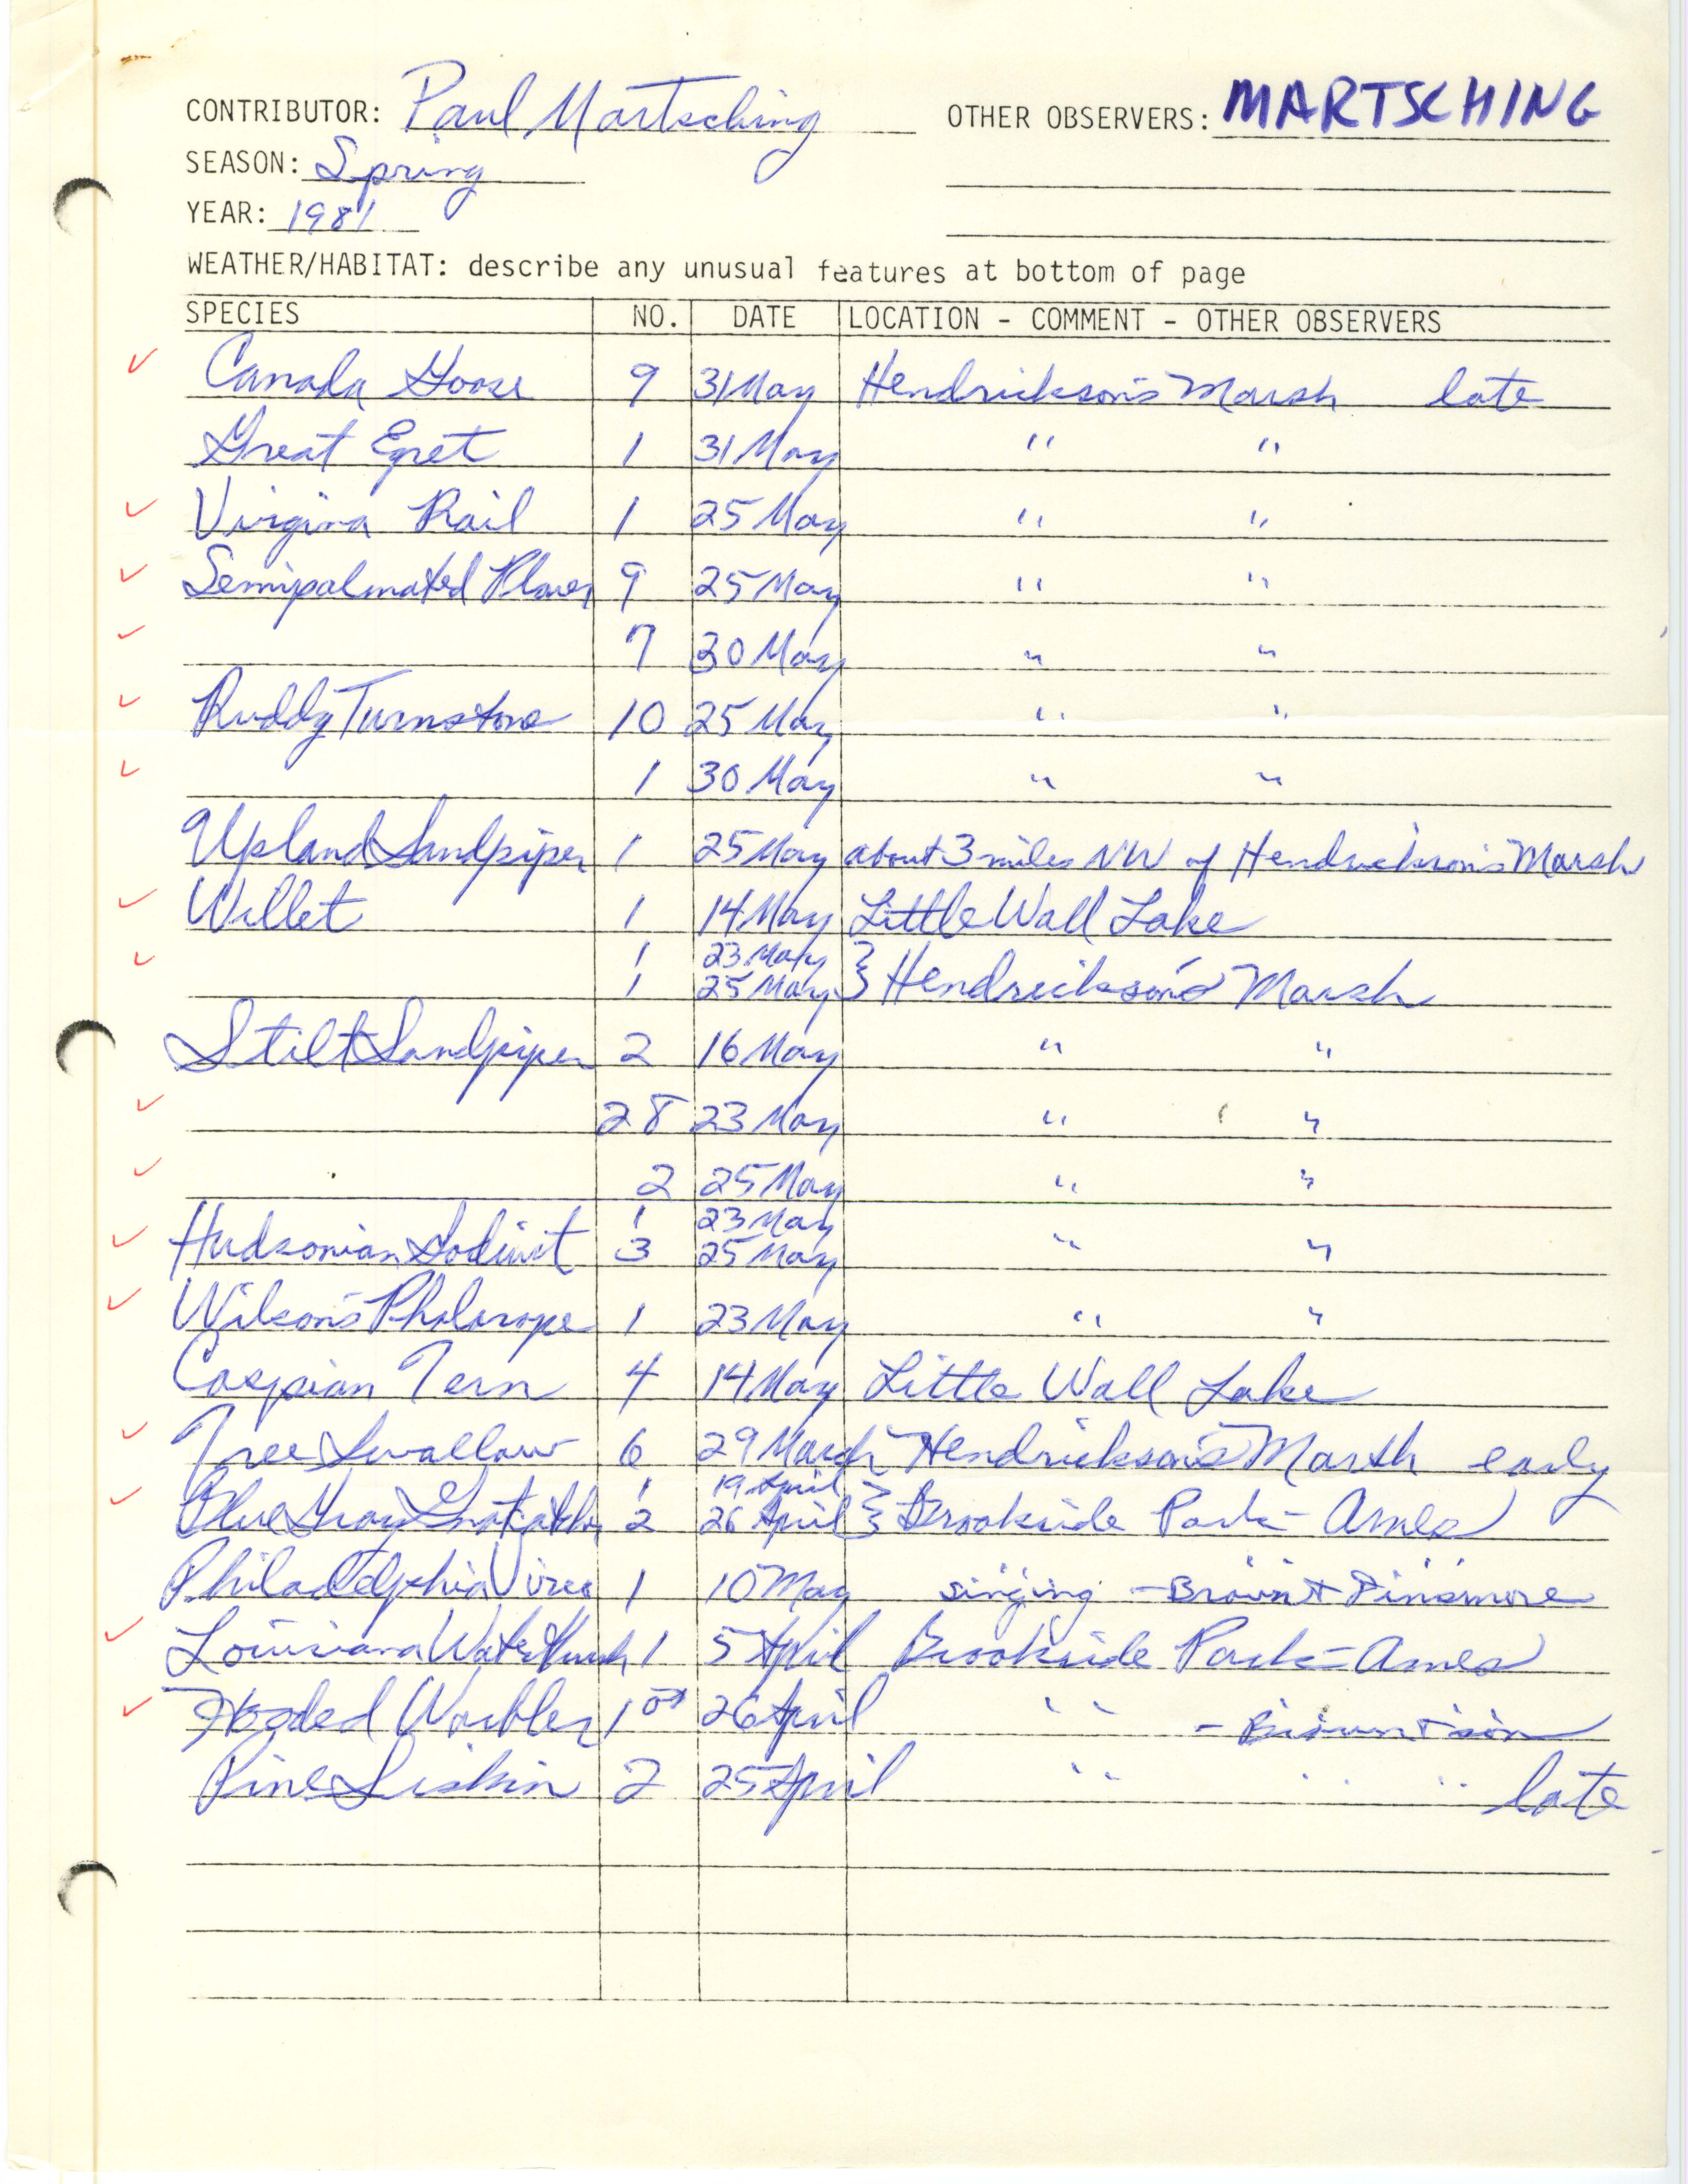 Annotated bird sighting list for spring 1981 compiled by Paul Martsching